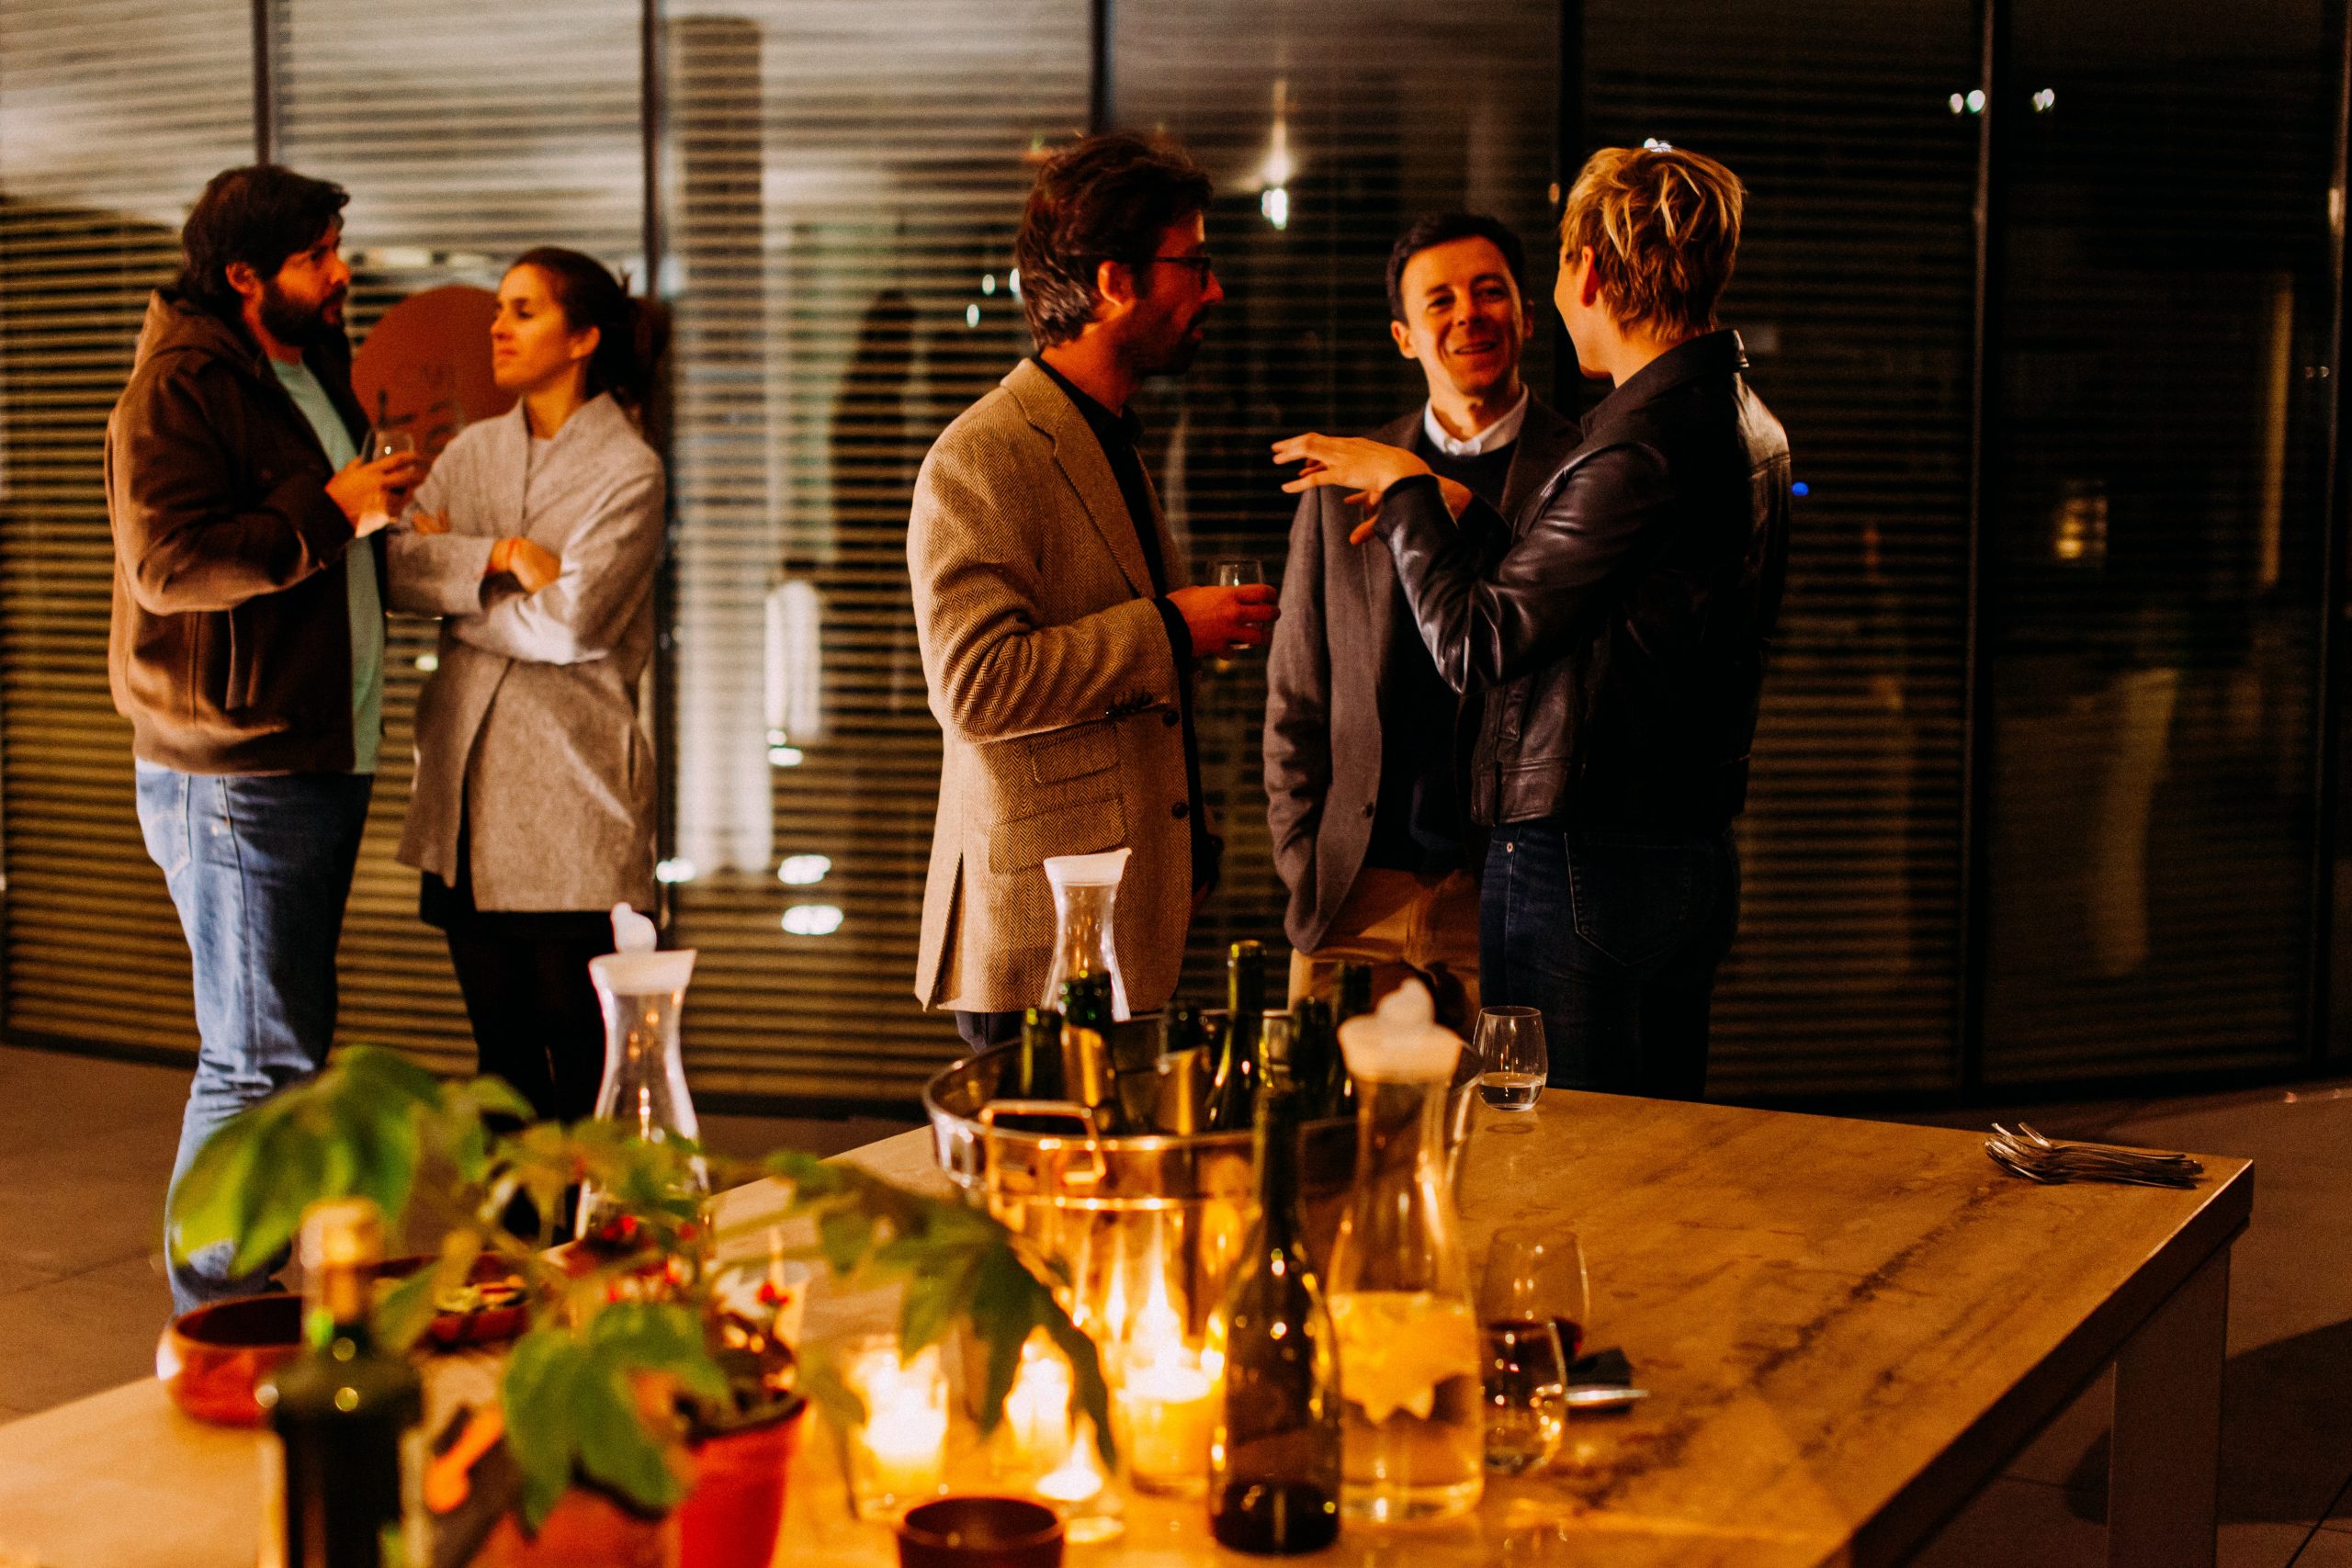 The 7 Benefits Corporate Events Can Bring to Businesses